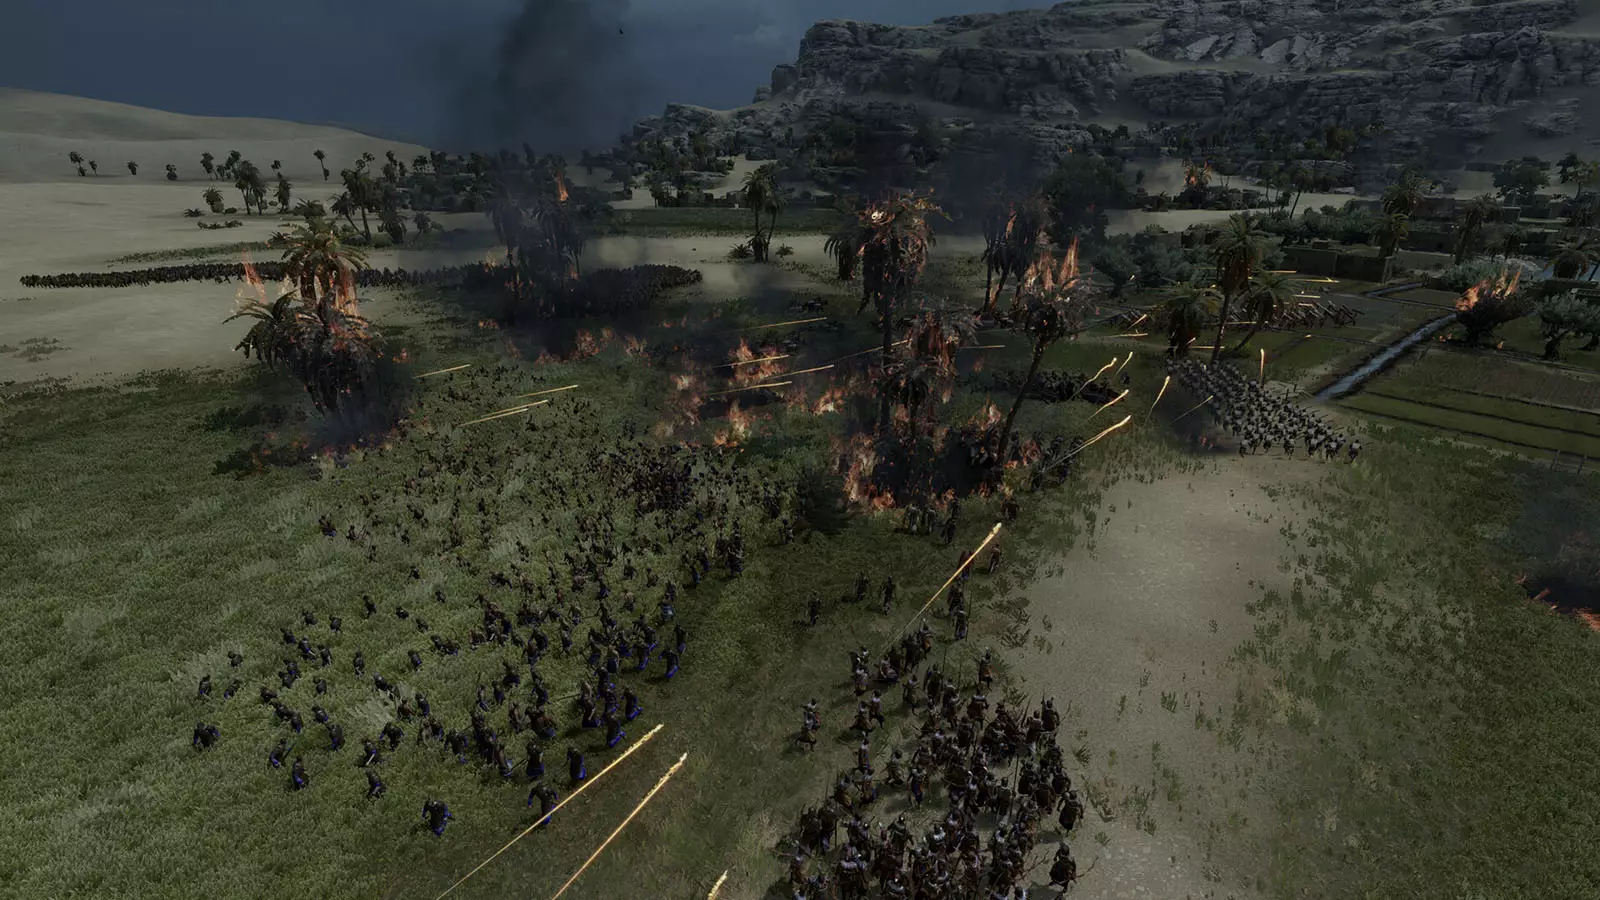 Total War: PHARAOH System Requirements - Can I Run It